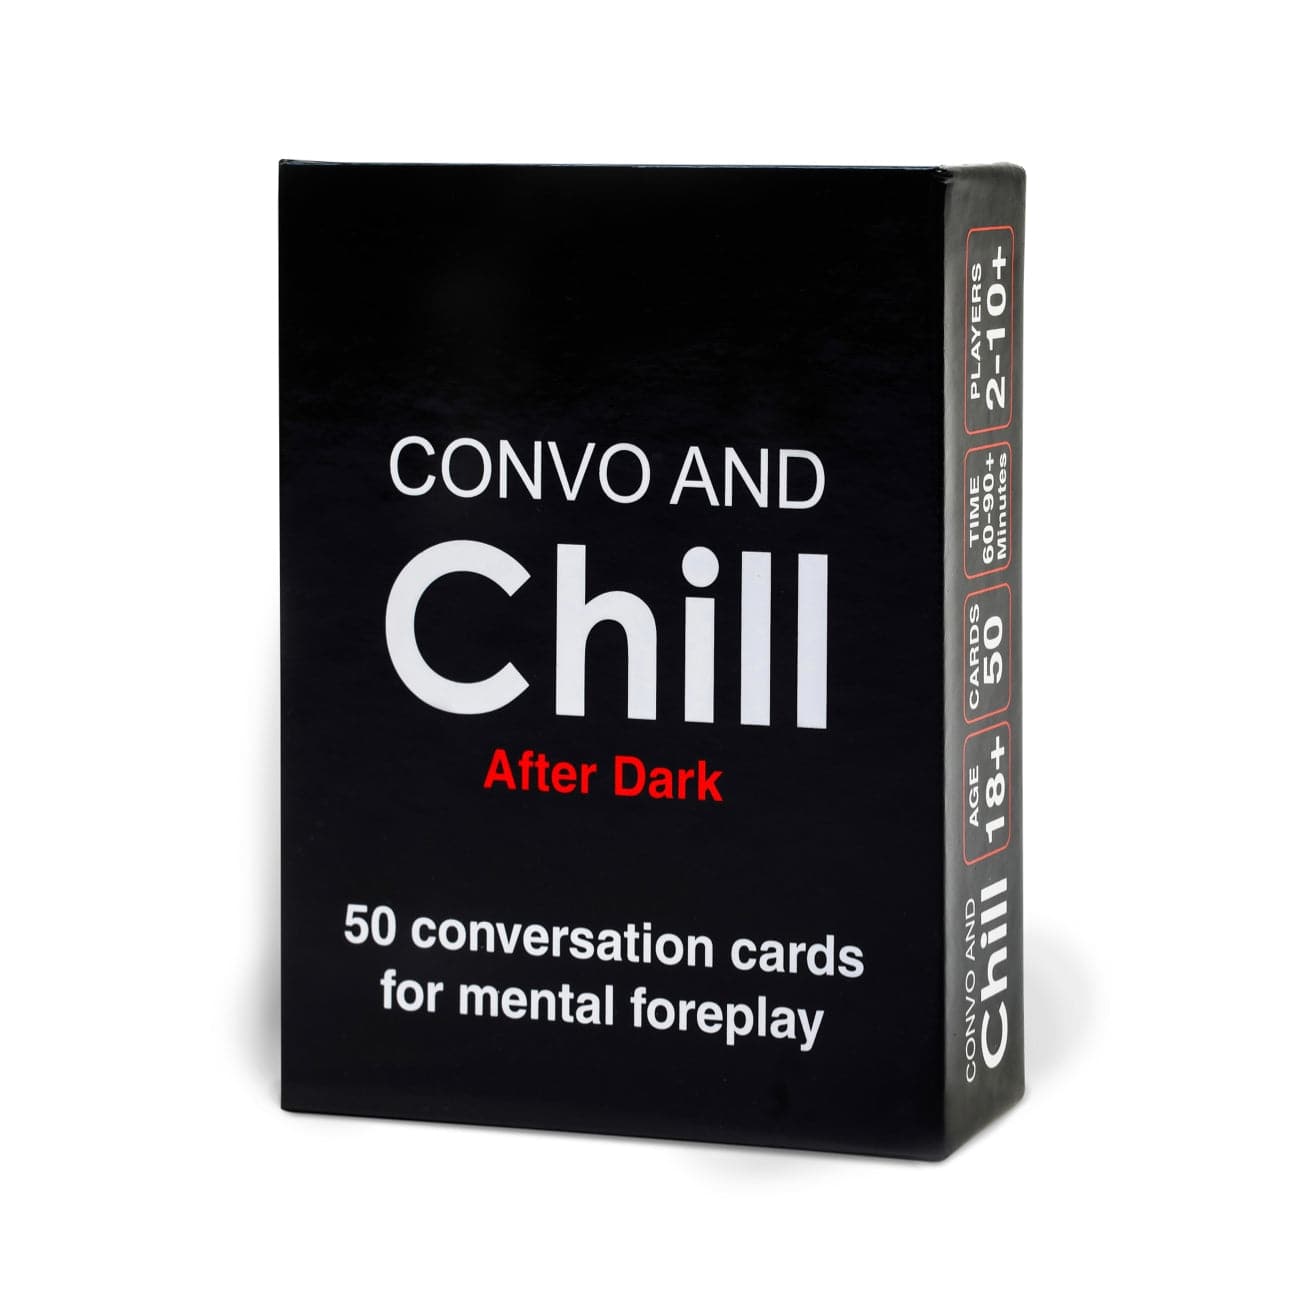 After Dark Edition | Convo and Chill - The Local Space